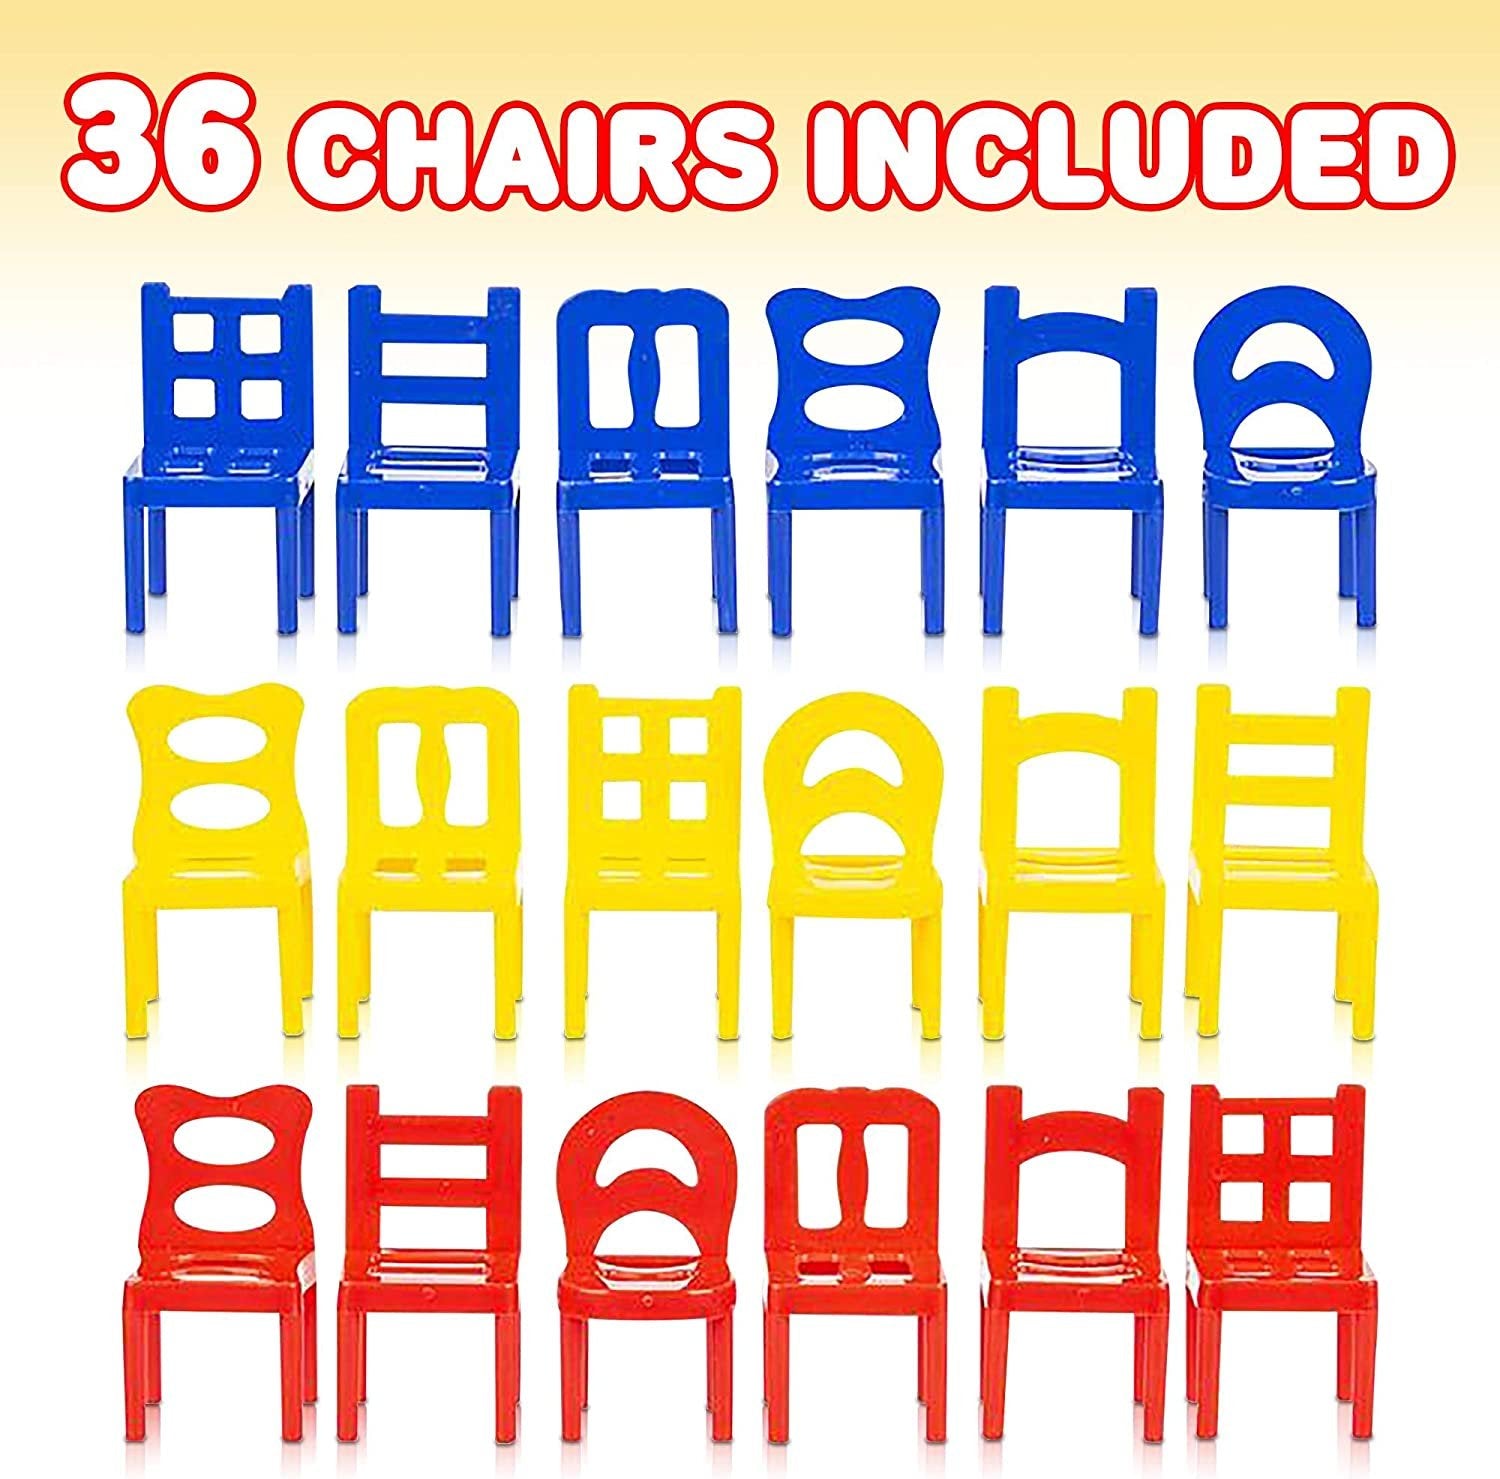 Gamie Balancing Chair Game, 2 Sets, Stacking Chair Games with 18 Mini Chairs & Instruction Guide, New Family Game Night Games for Children, Development Learning Game for Coordination & Balance